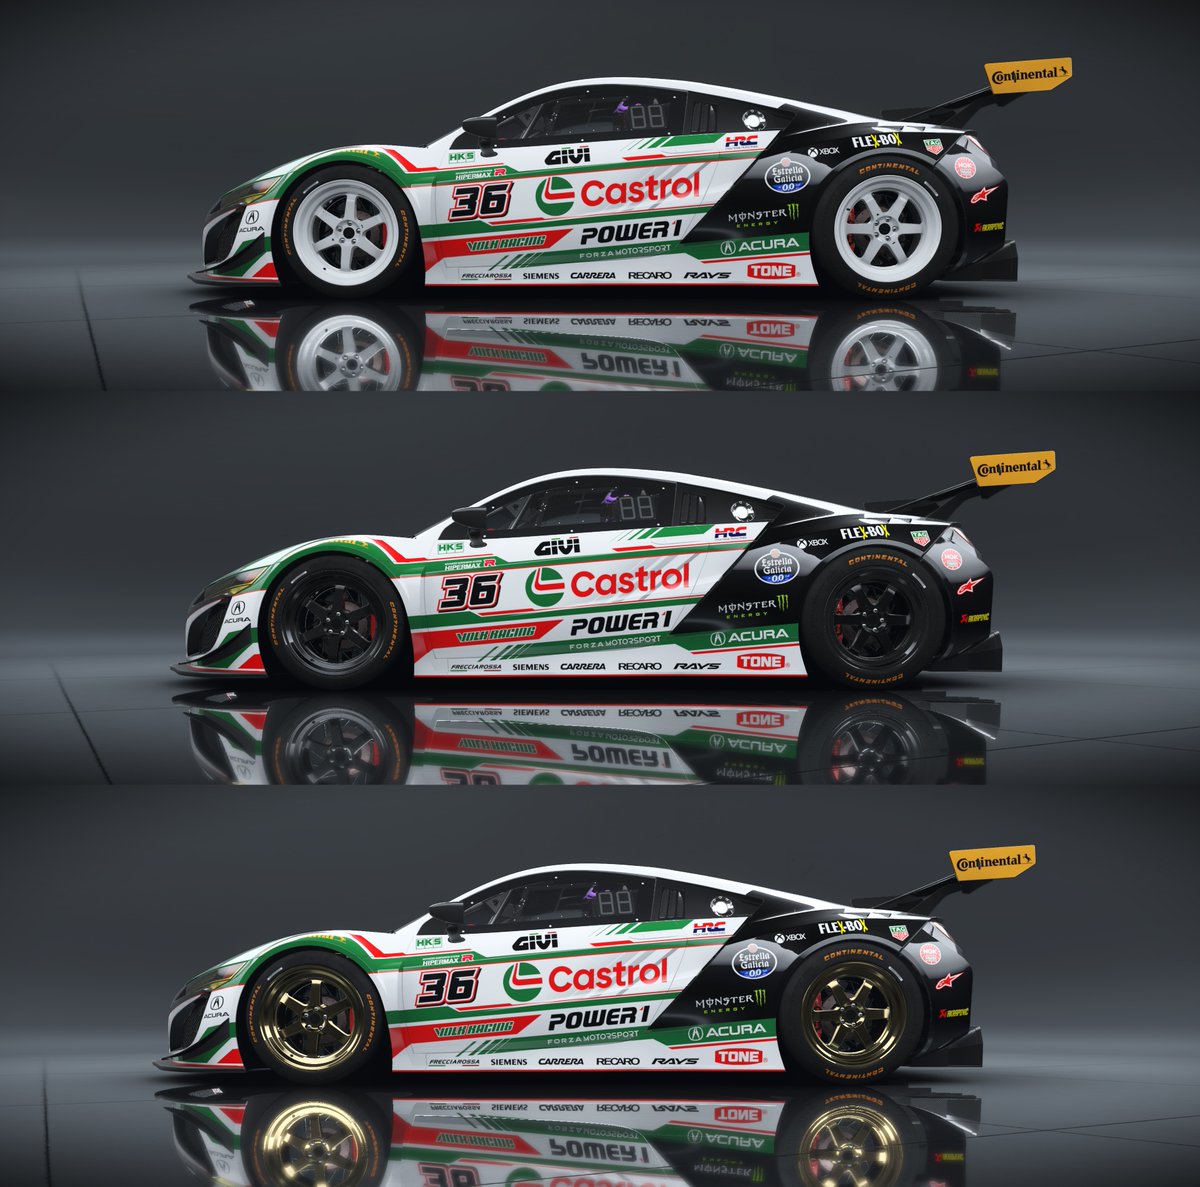 Doing a couple of new Moto GP inspired Castrol liveries for the #36 ACURA NSX GT3 & the #73 LA Honda World Civic on Forza Motorsport.
Just picking rims now for the NSX...which colour do you reckon? 🤔
#ForzaMotorsport #forzashare #RaceMotoGP #acuramotorsports #Honda #Castrol